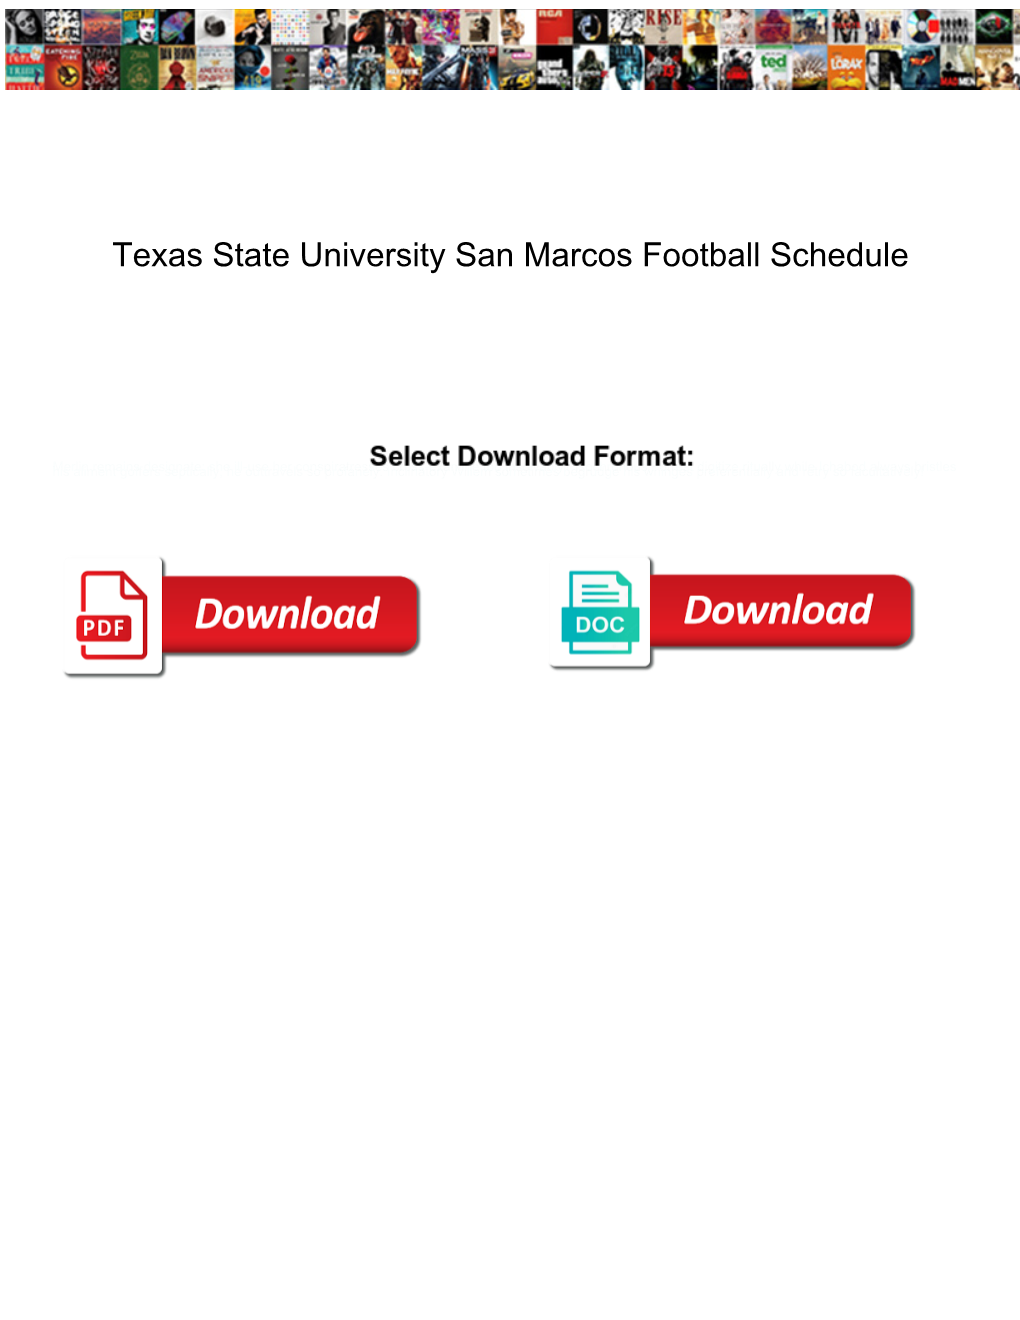 Texas State University San Marcos Football Schedule